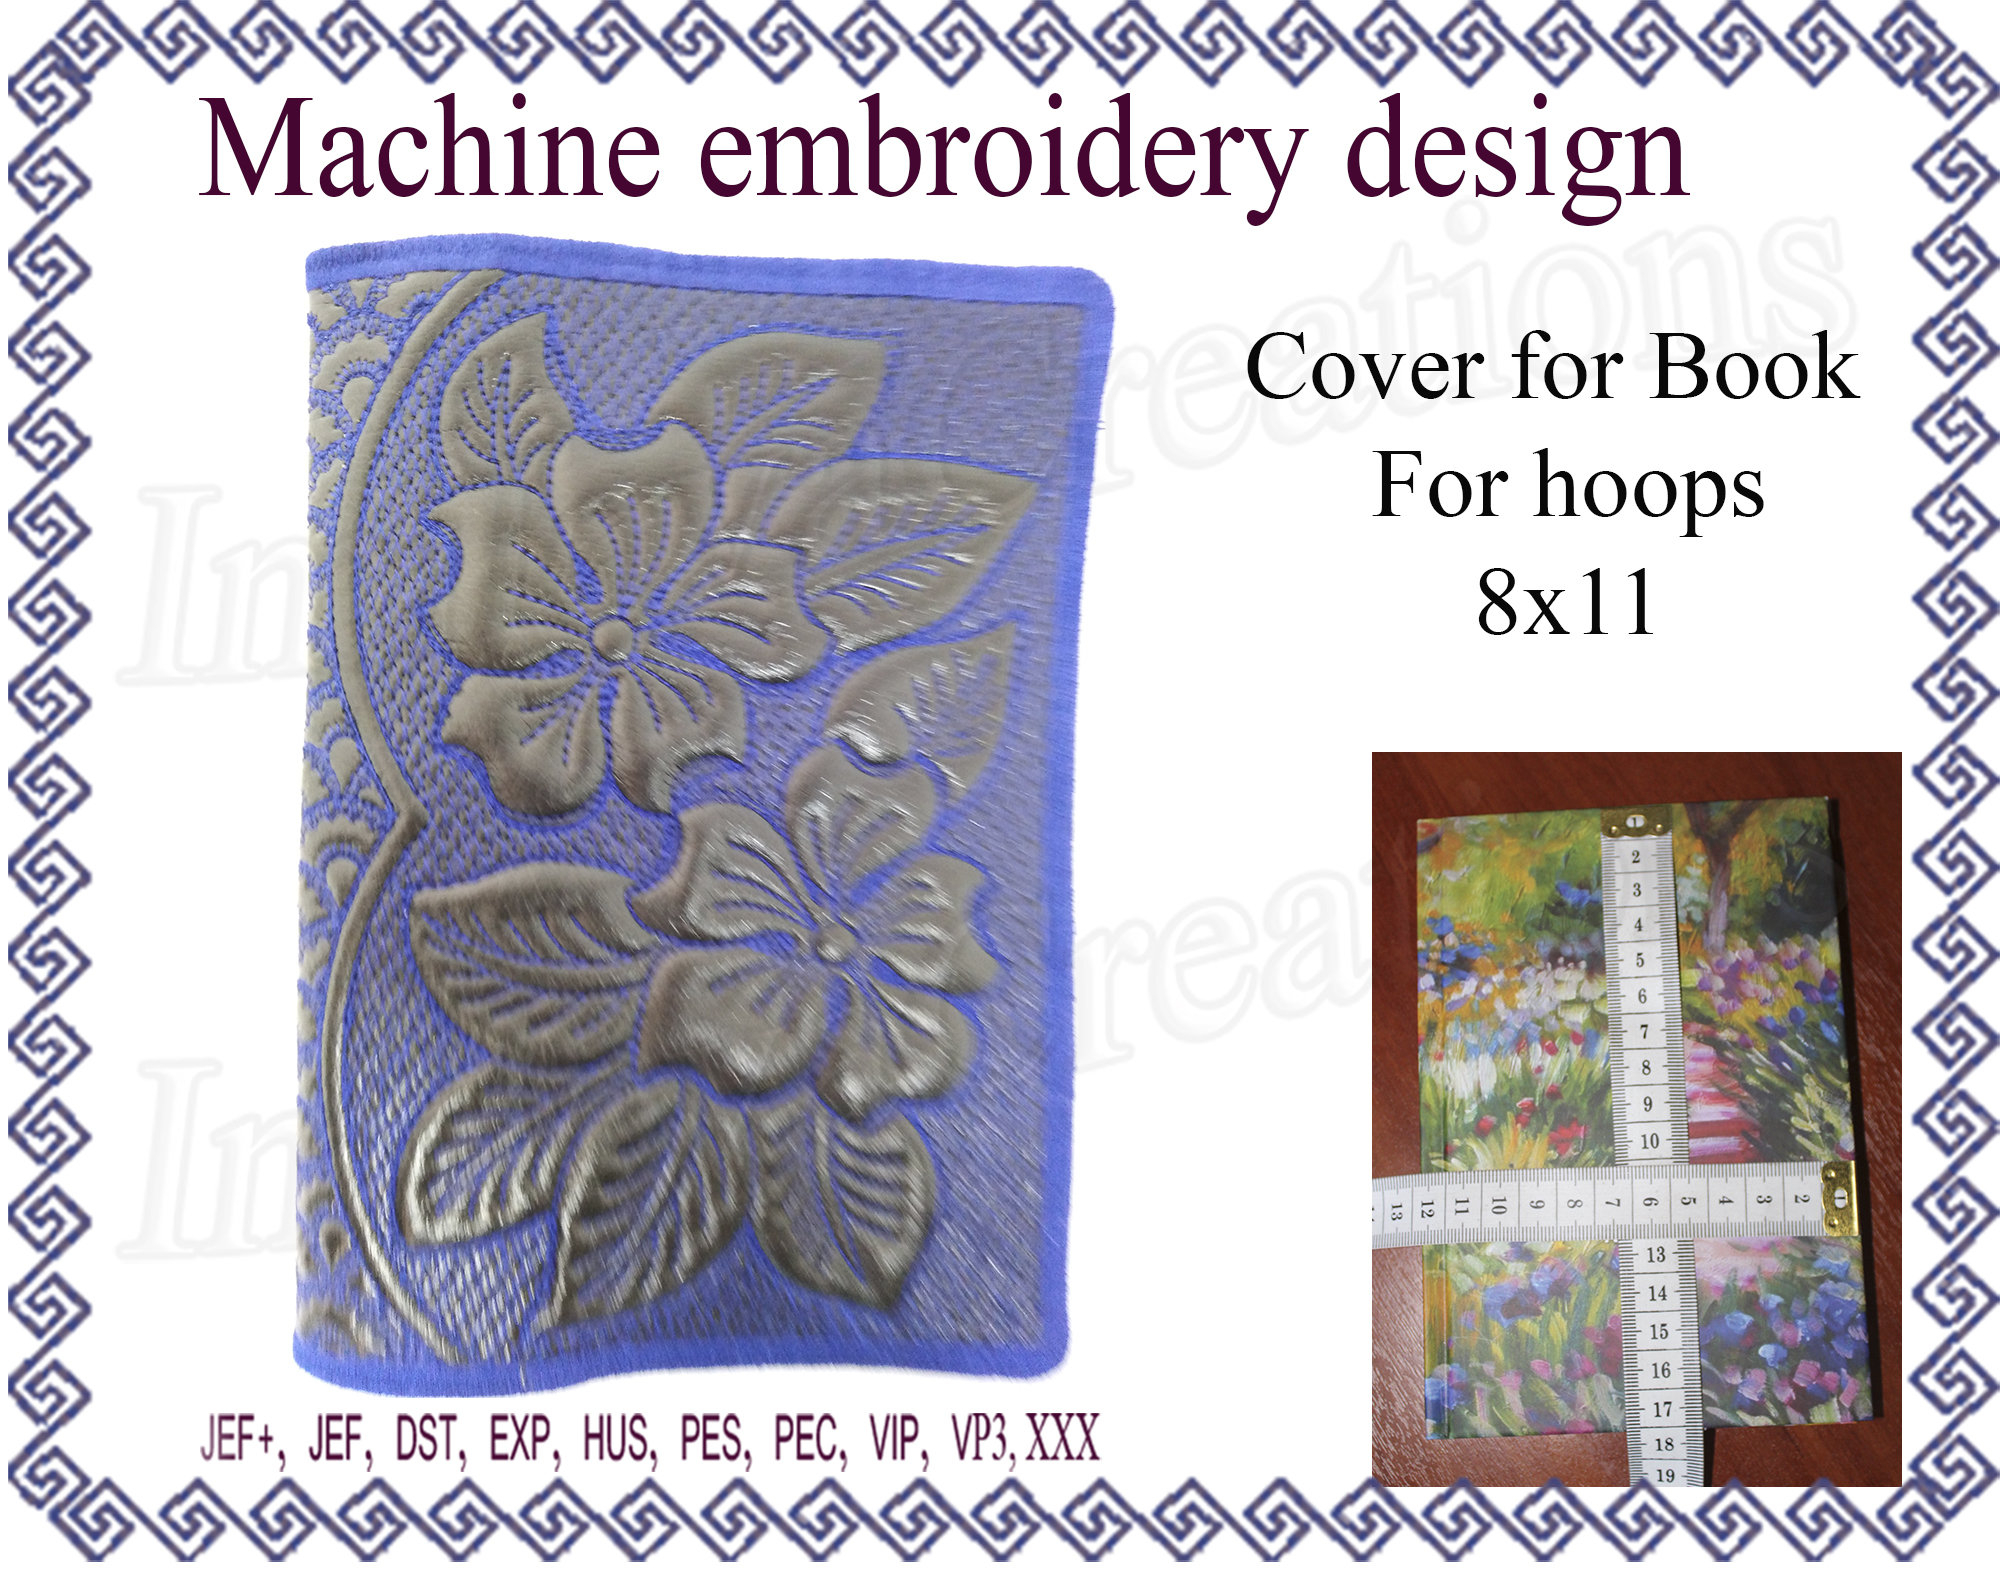 In The Hoop Embroidery Patterns Machine Embroidery Designs Cover For Book In The Hoop Flowers Embroidery Designs Ith Embroidery Design File Instant Download